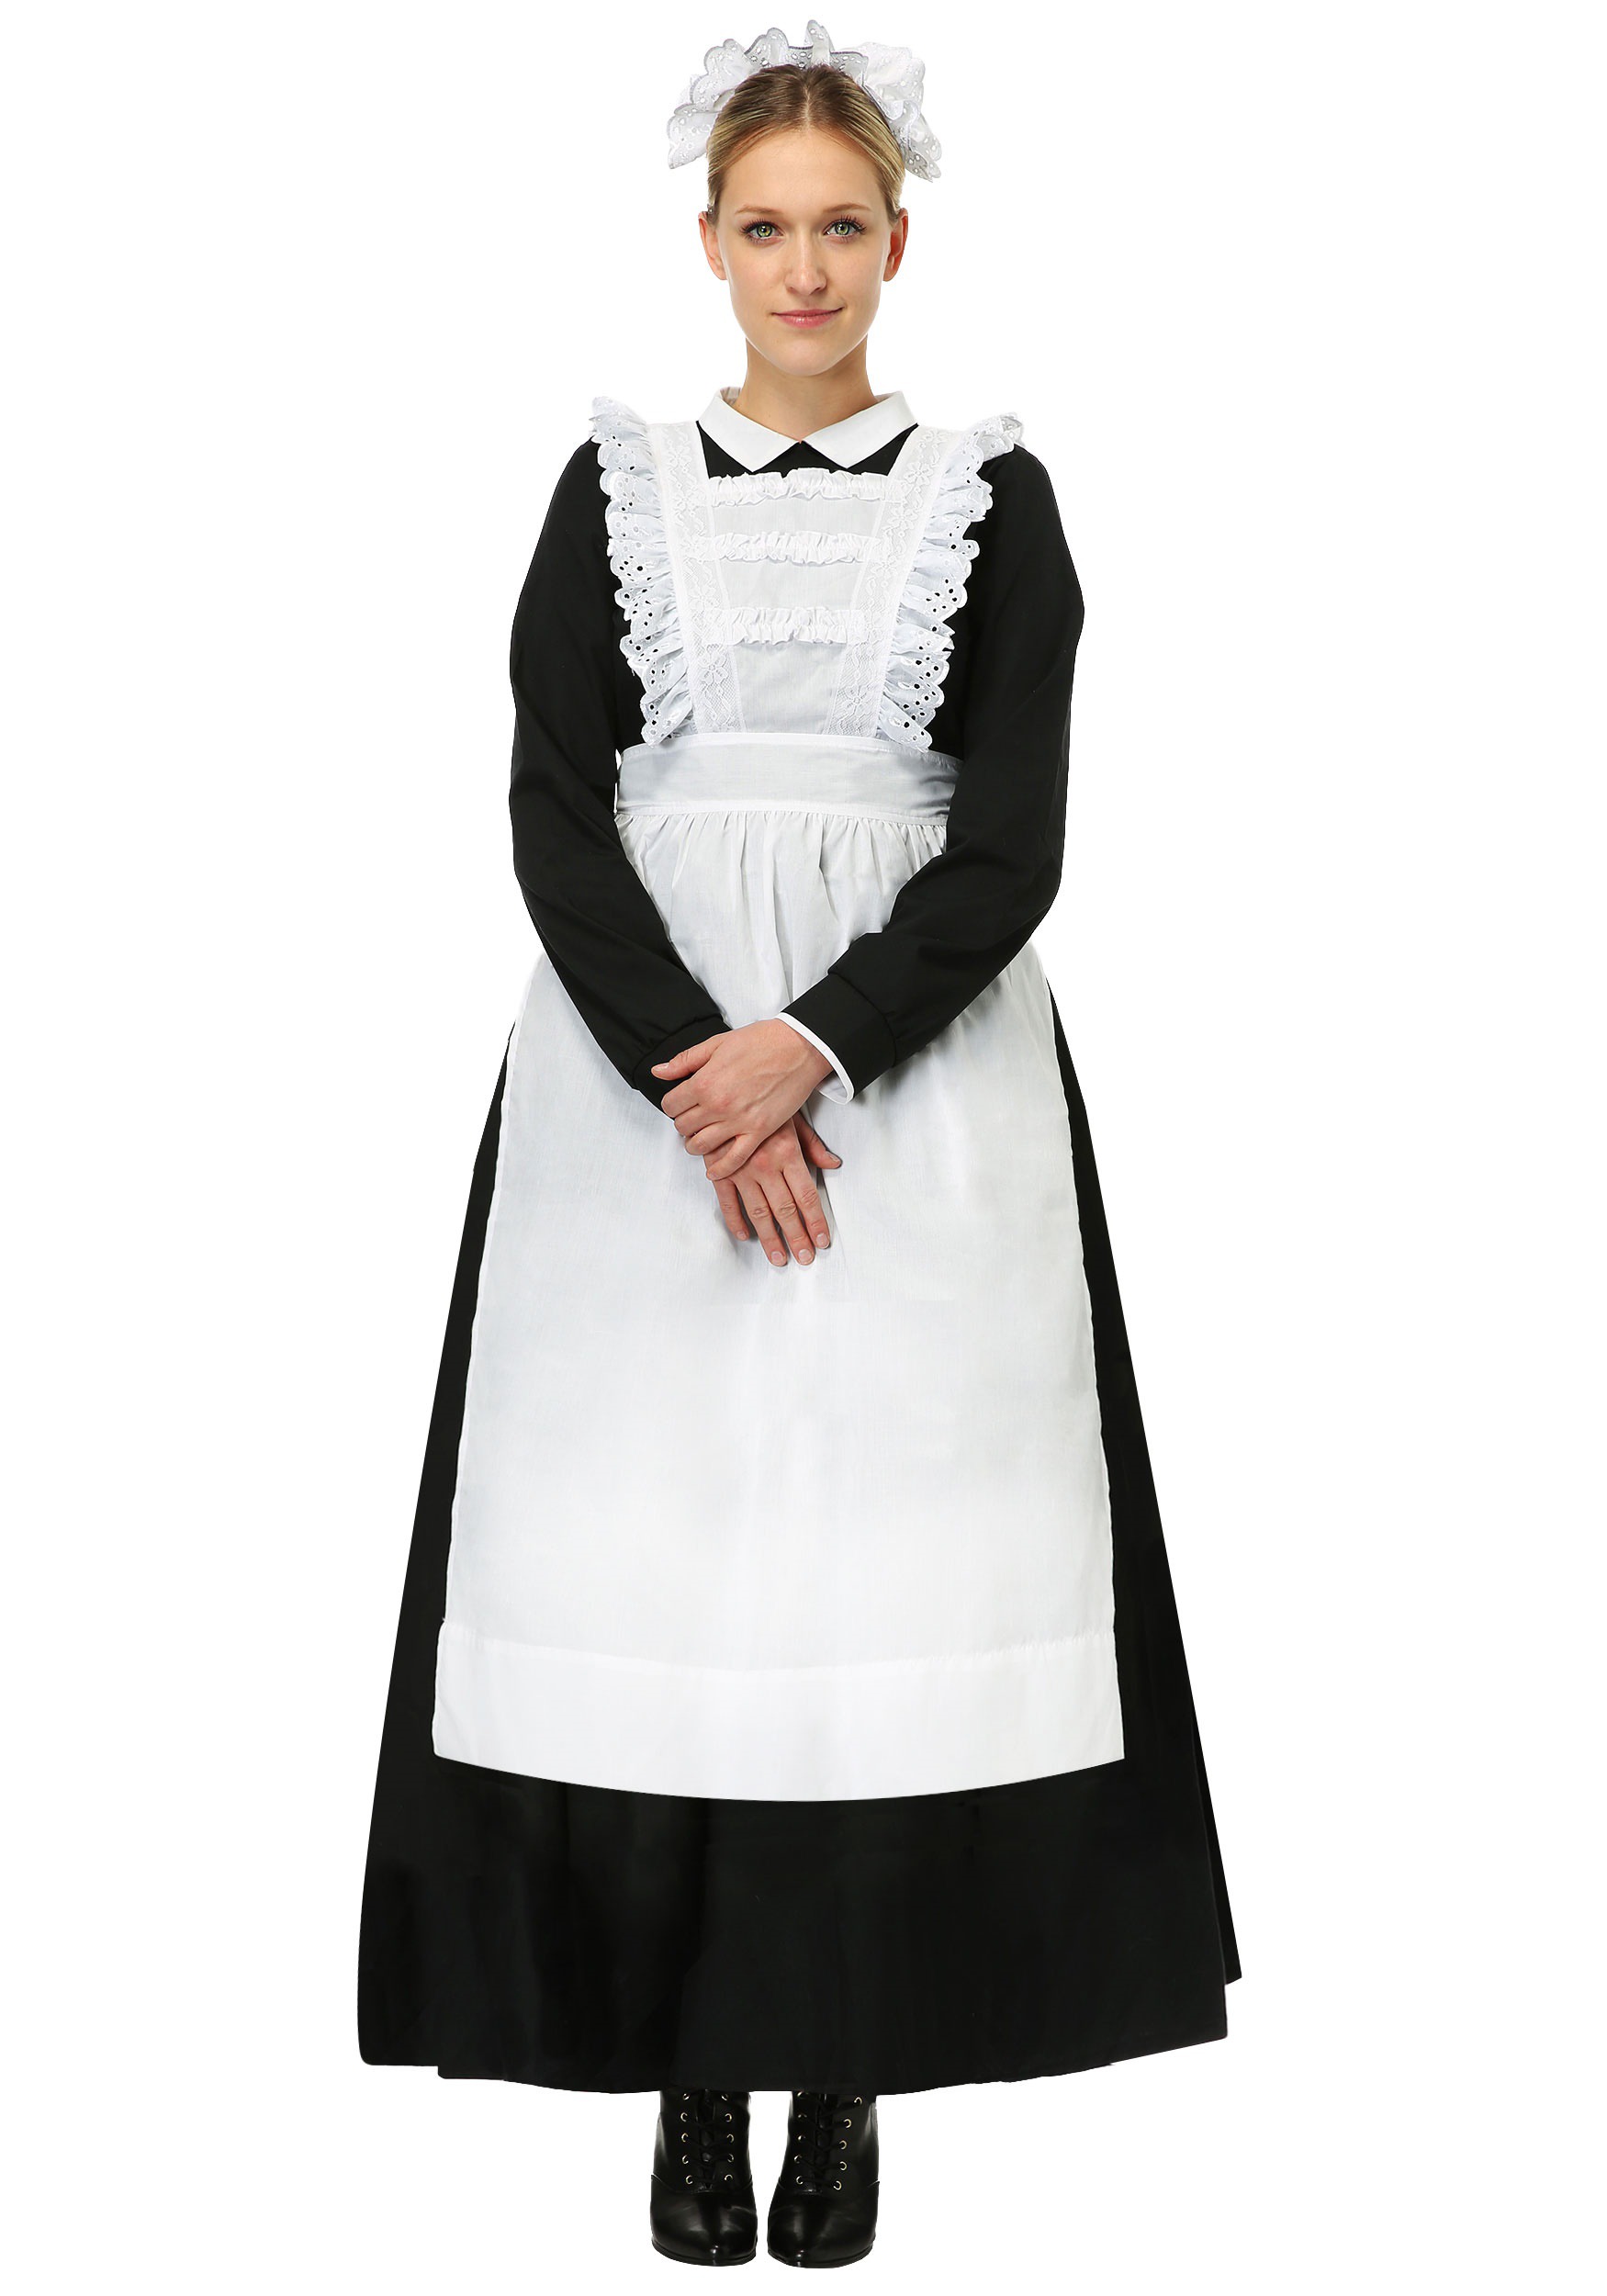 Traditional Maid Fancy Dress Costume For Women